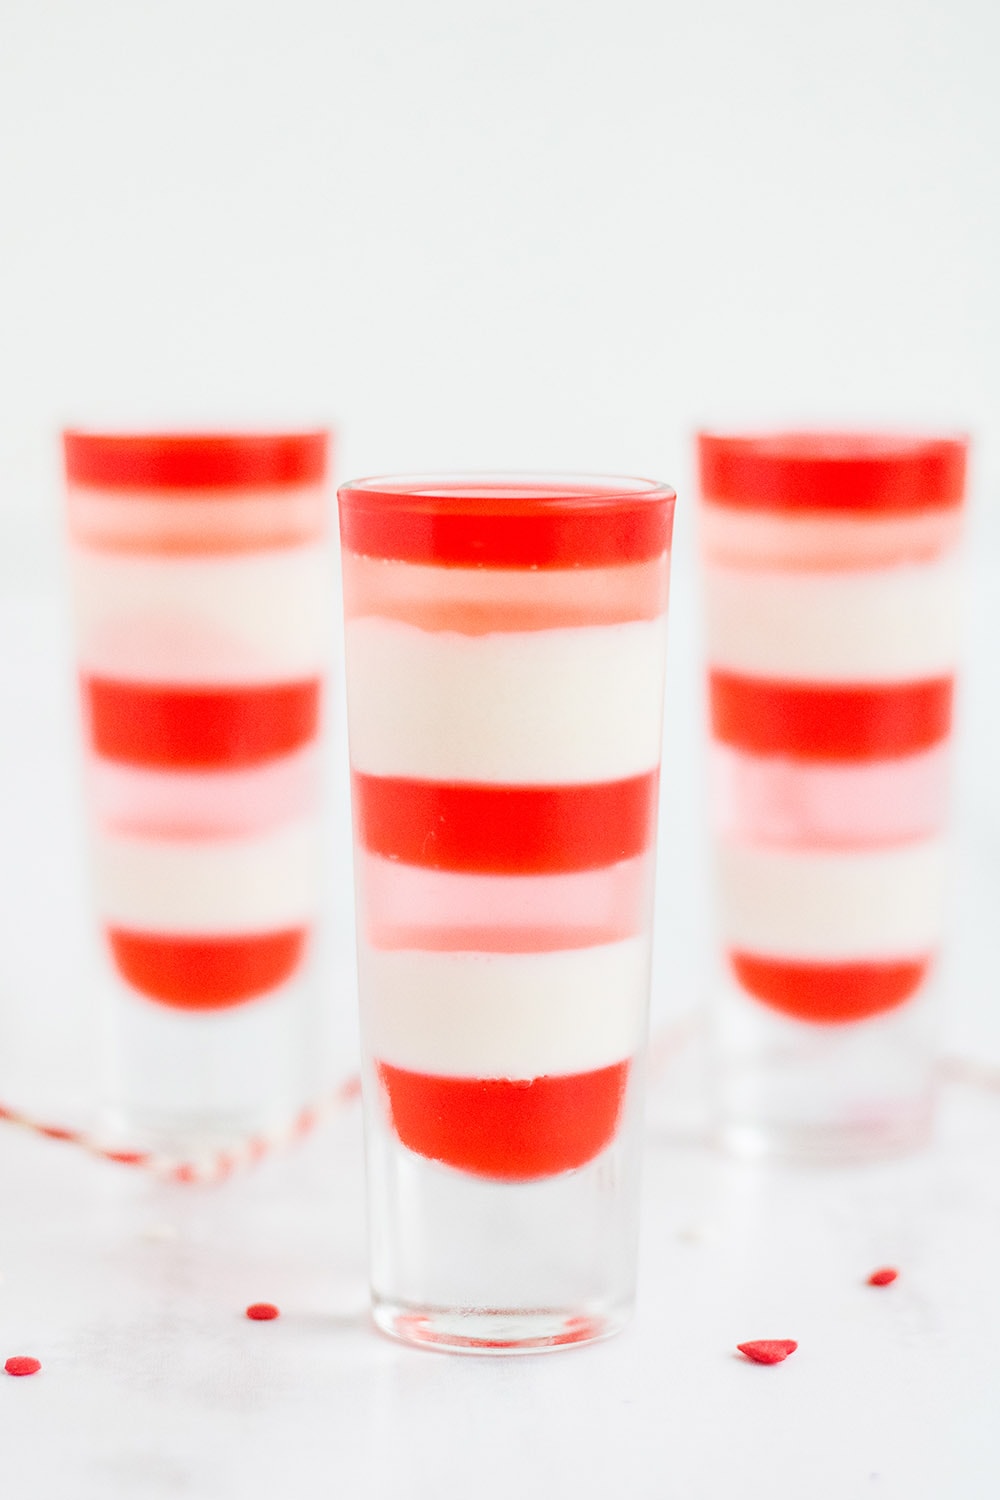 Three dessert shooters filled with red, white, and pink gelatin layers.